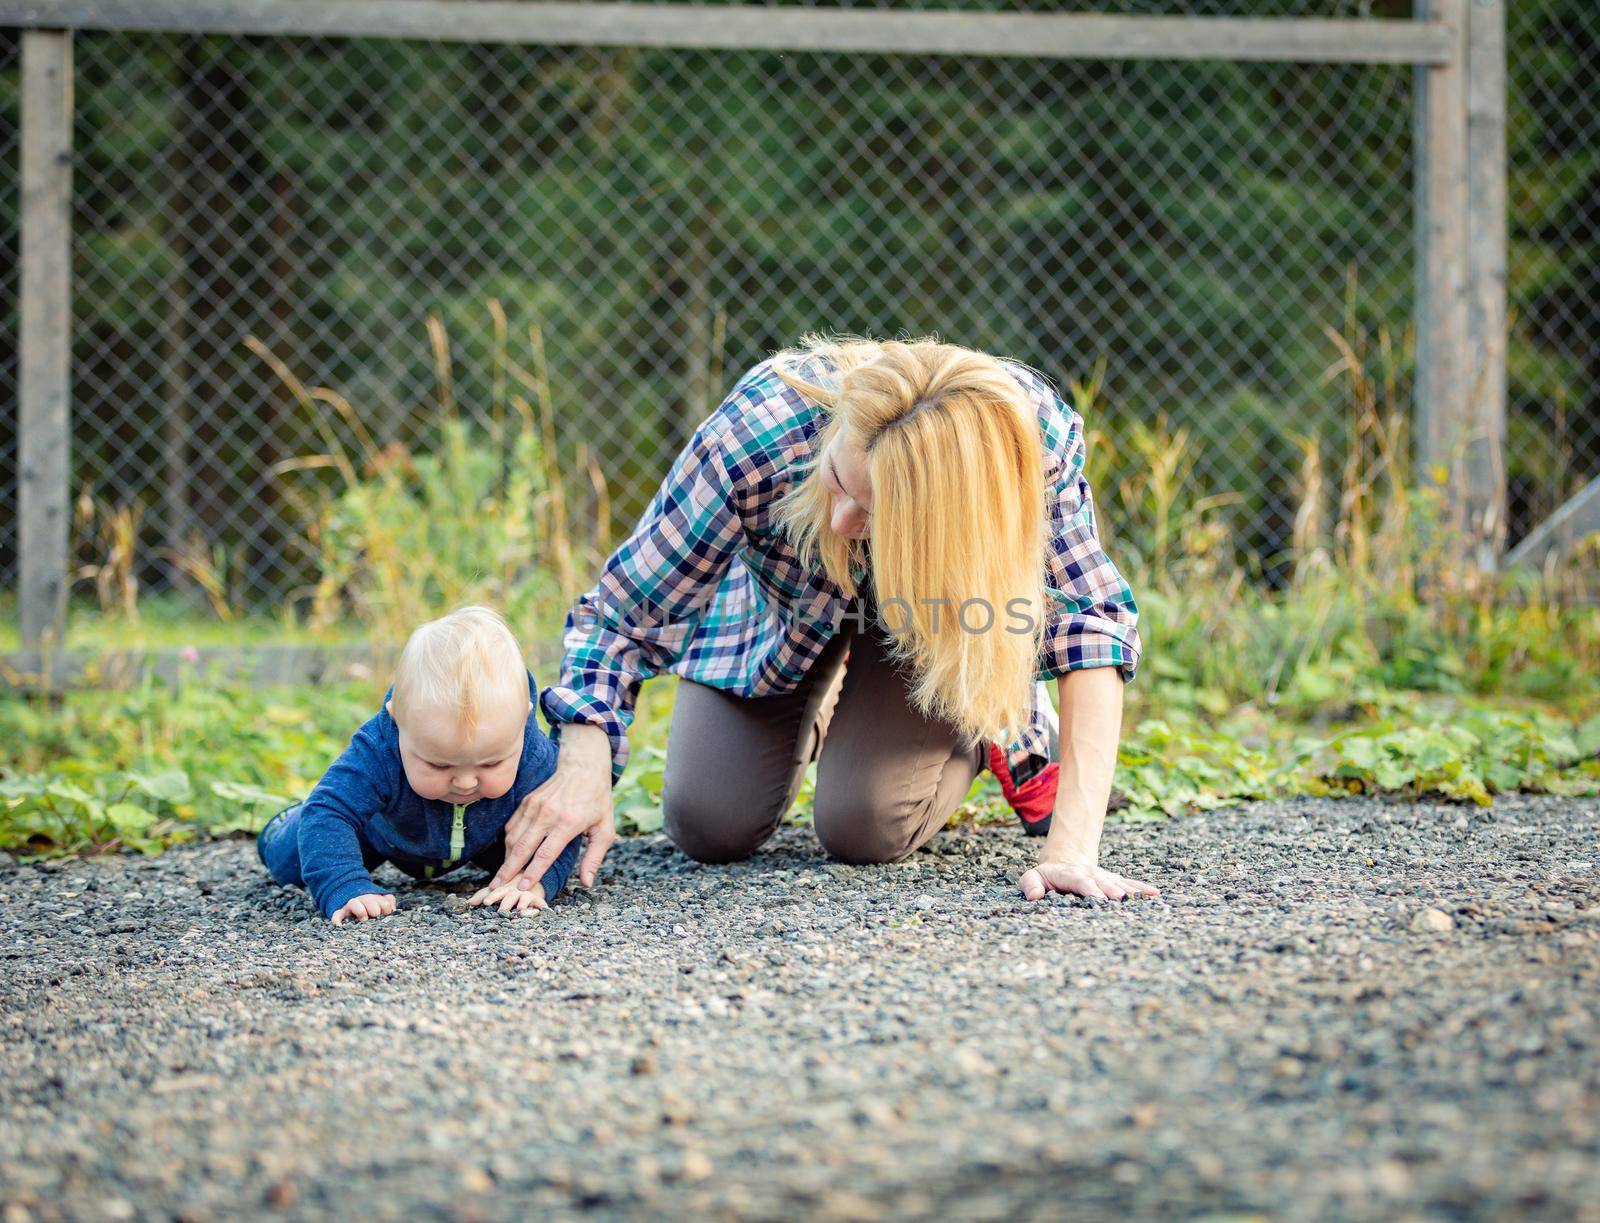 Mom plays with the child sitting on the sidewalk. Family on a walk by Yurich32